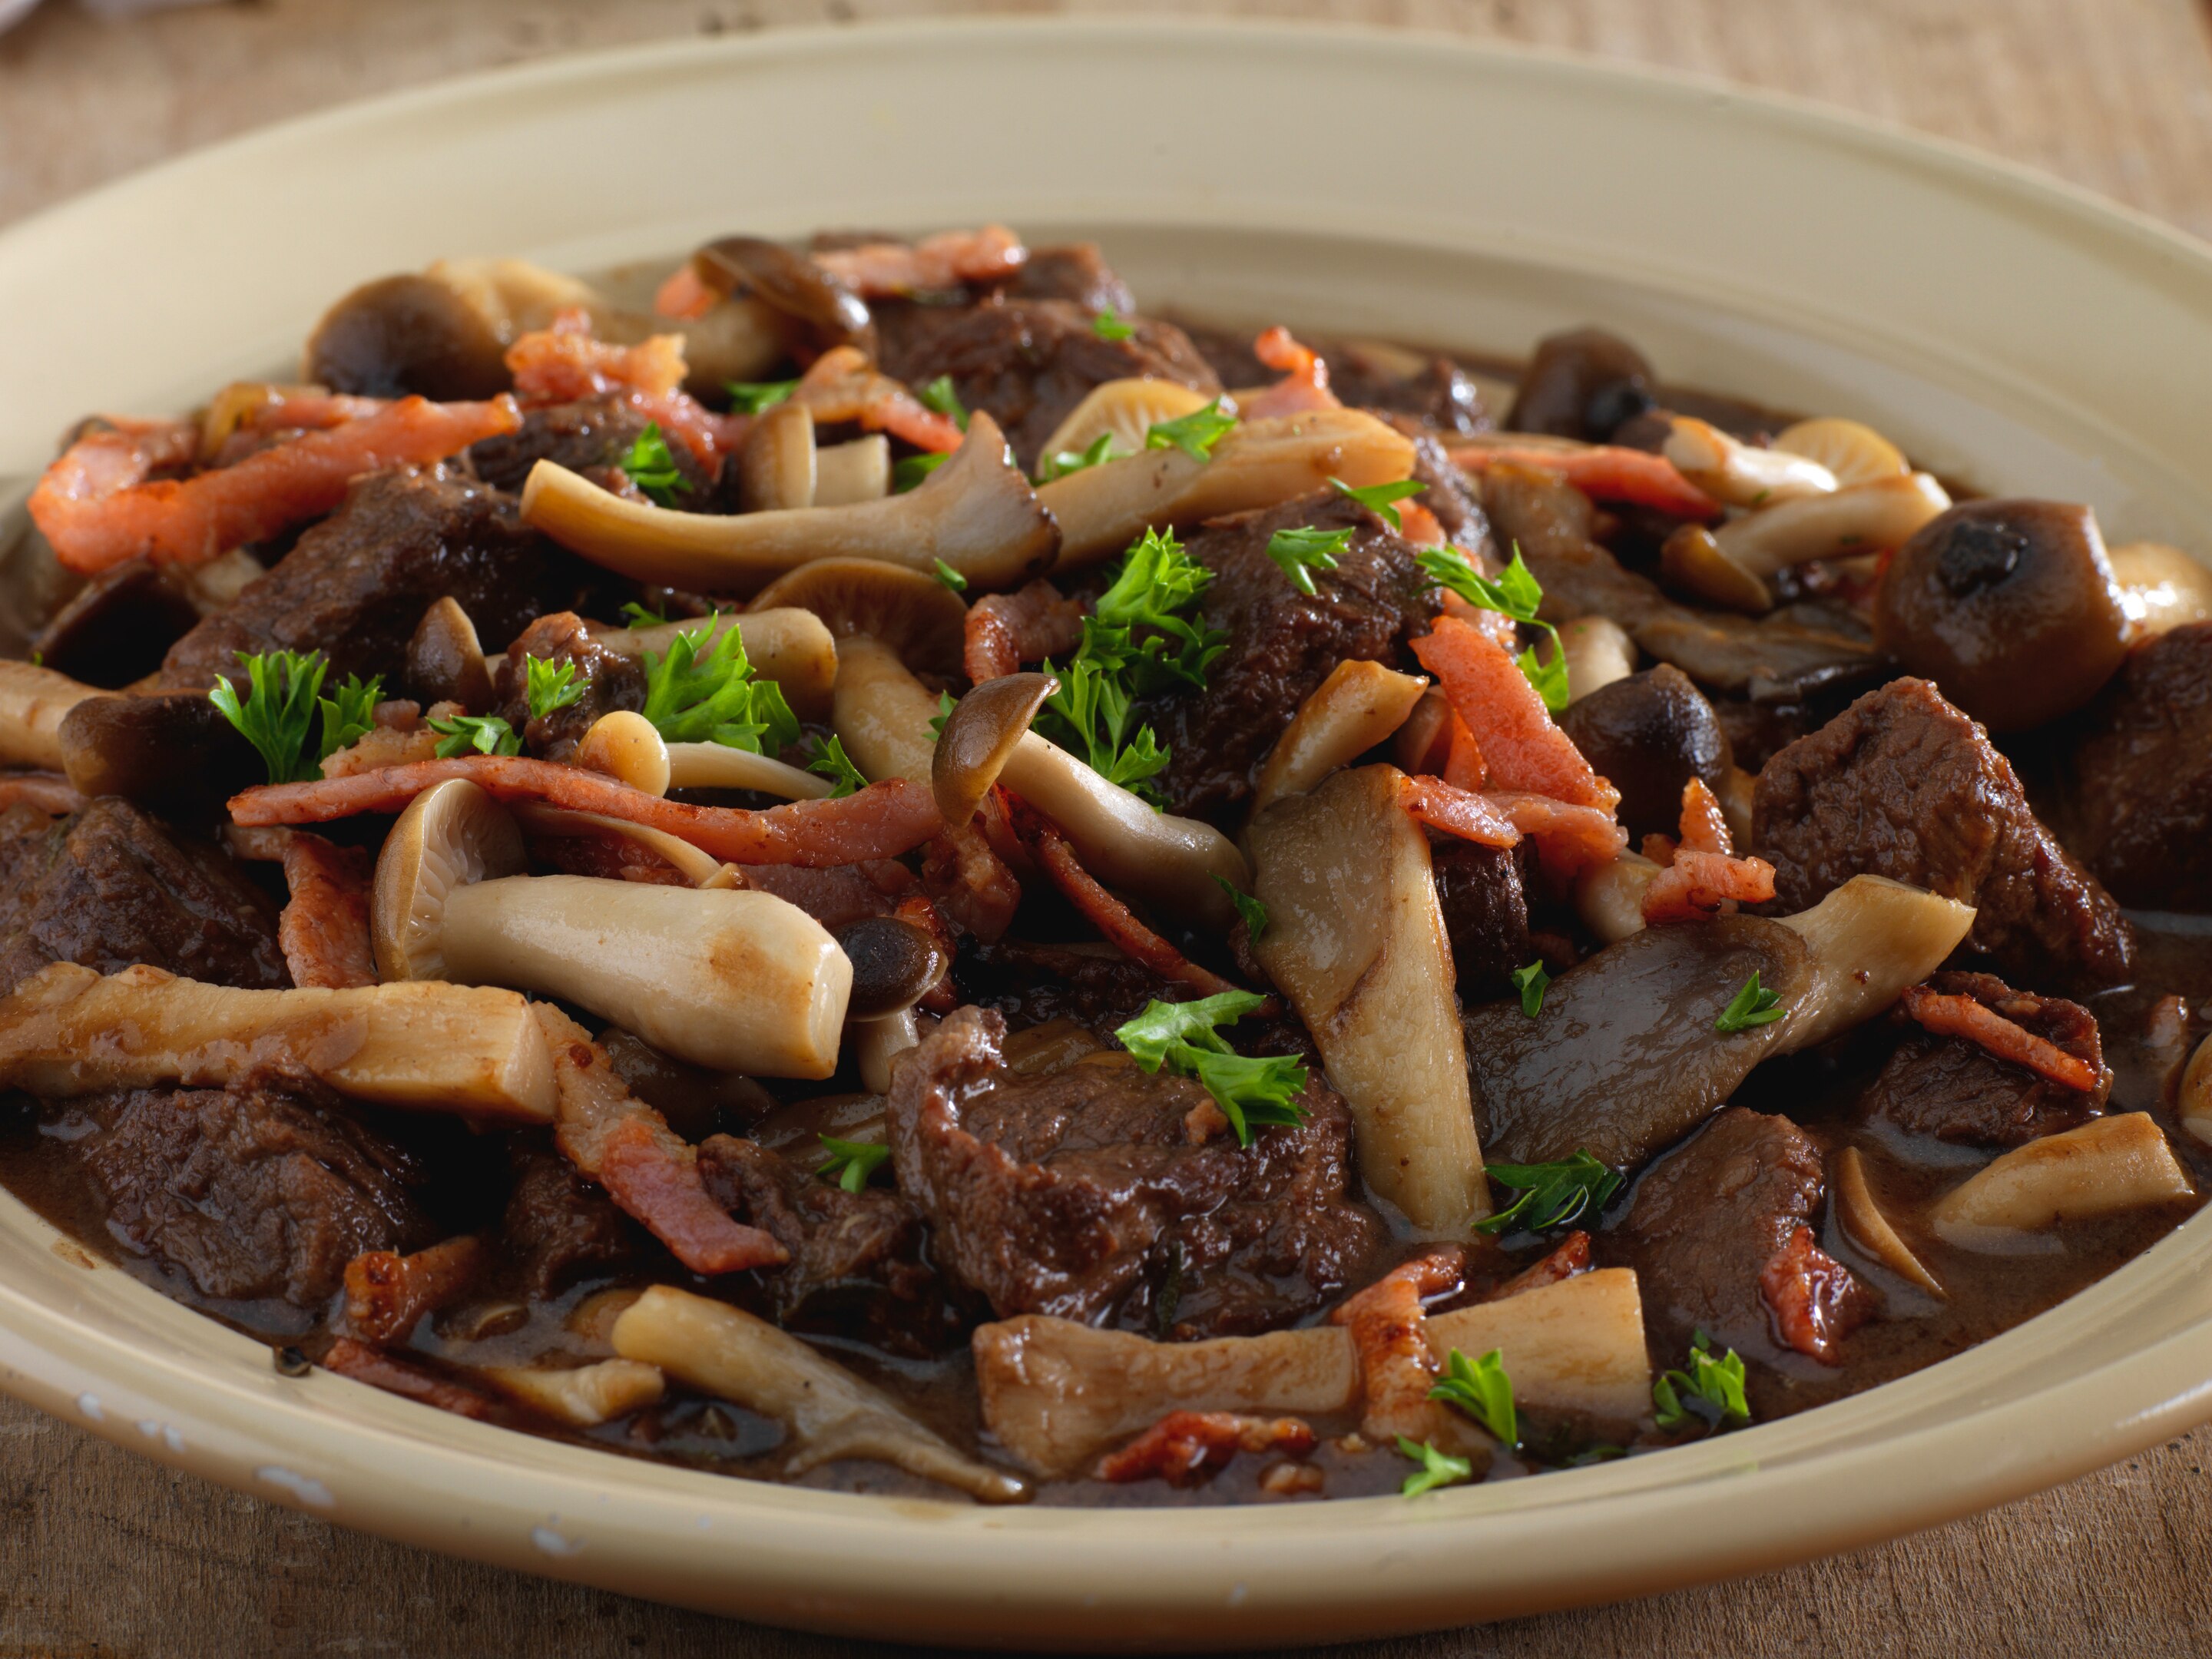 Beef bourguignon in mushrooms and red wine sauce